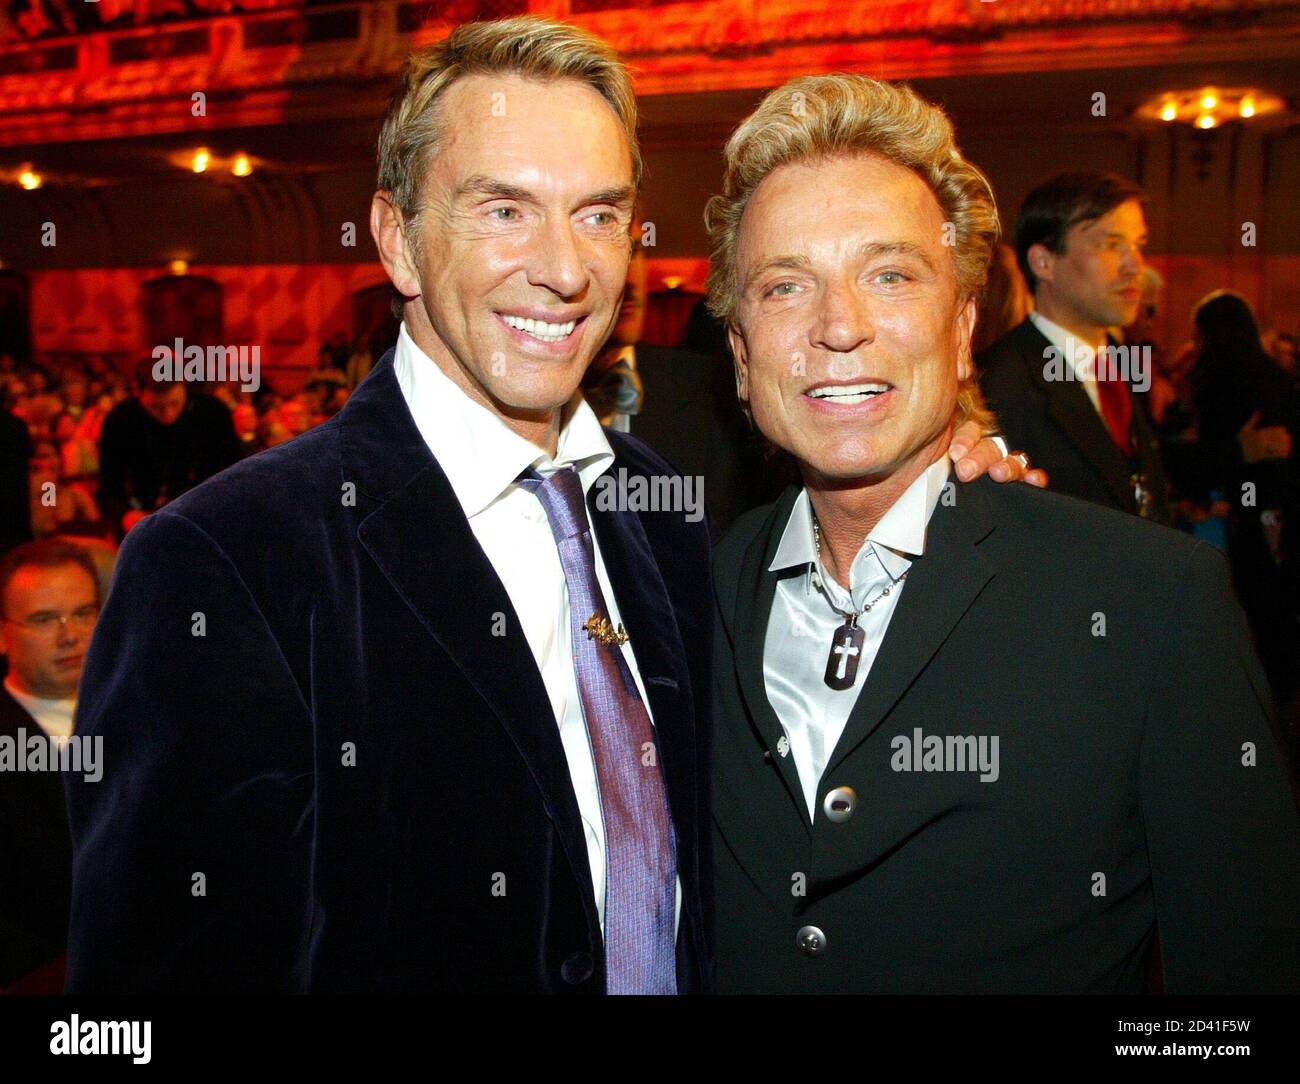 German fashion designer Wolfgang Joop (L) and German illusionist Siegfried  Fischbacher pose before the World Awards gala in the northern German city  of Hamburg October 22, 2003. Fischbacher received the "World Entertainment